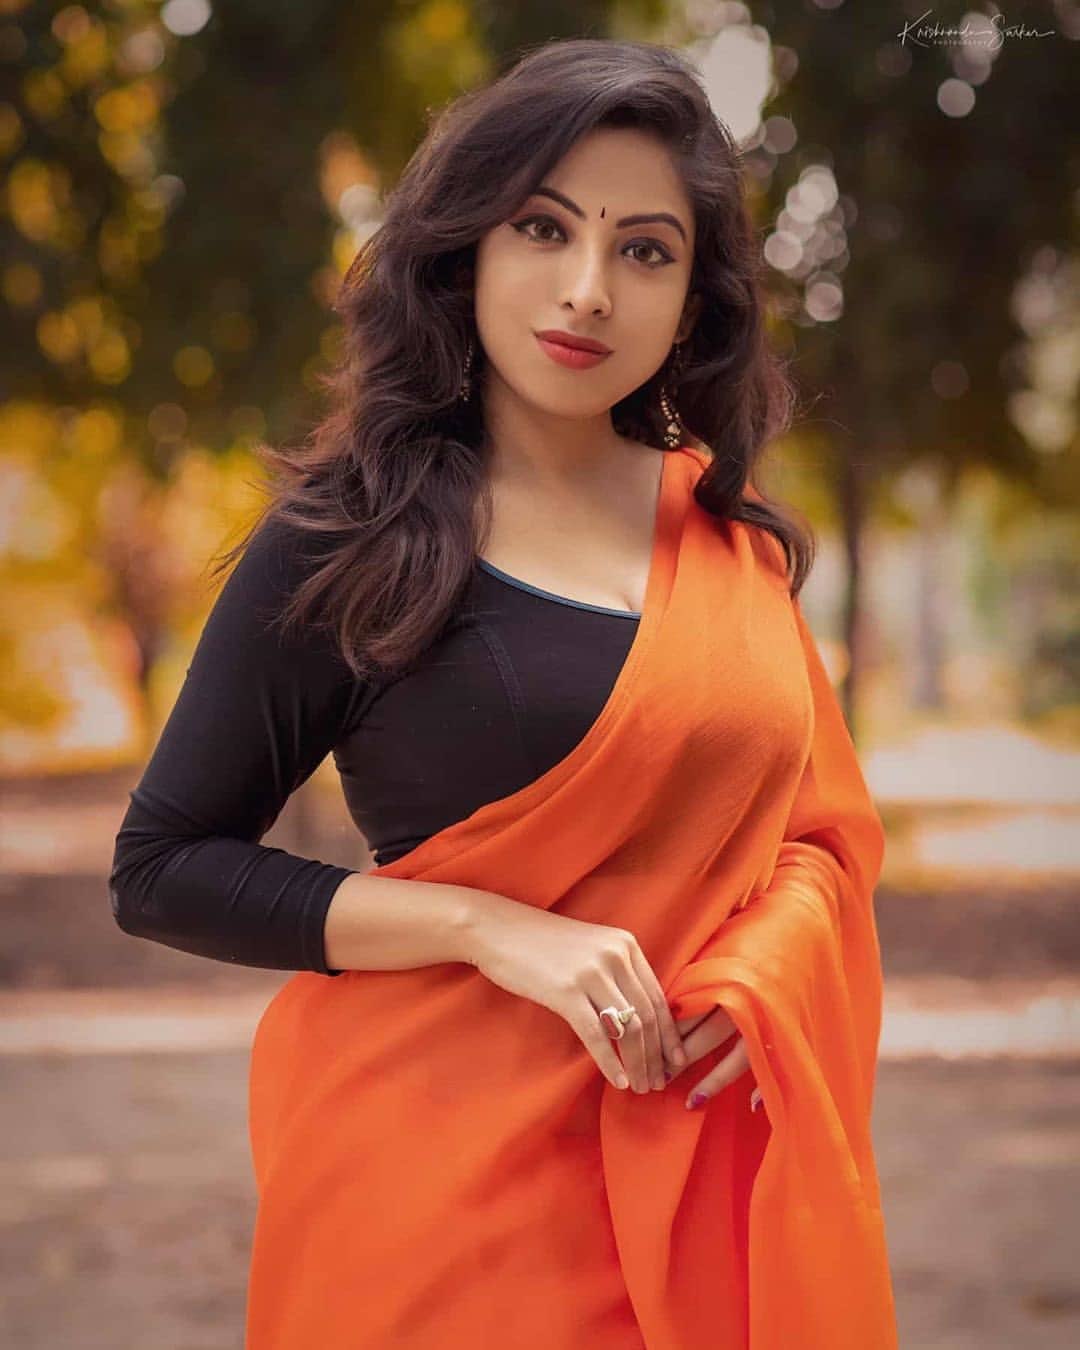 Beautiful Indian Women in Saree- Hottest Photo Gallery!